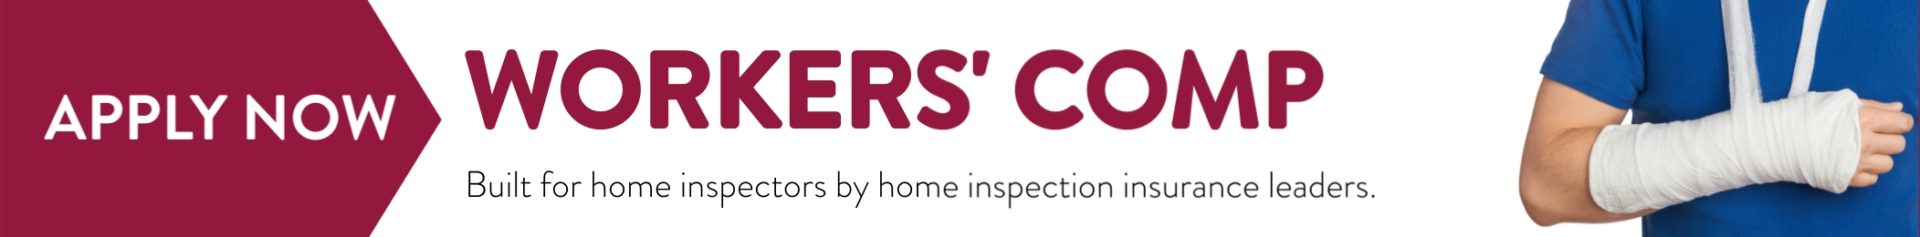 workers' comp for home inspectors